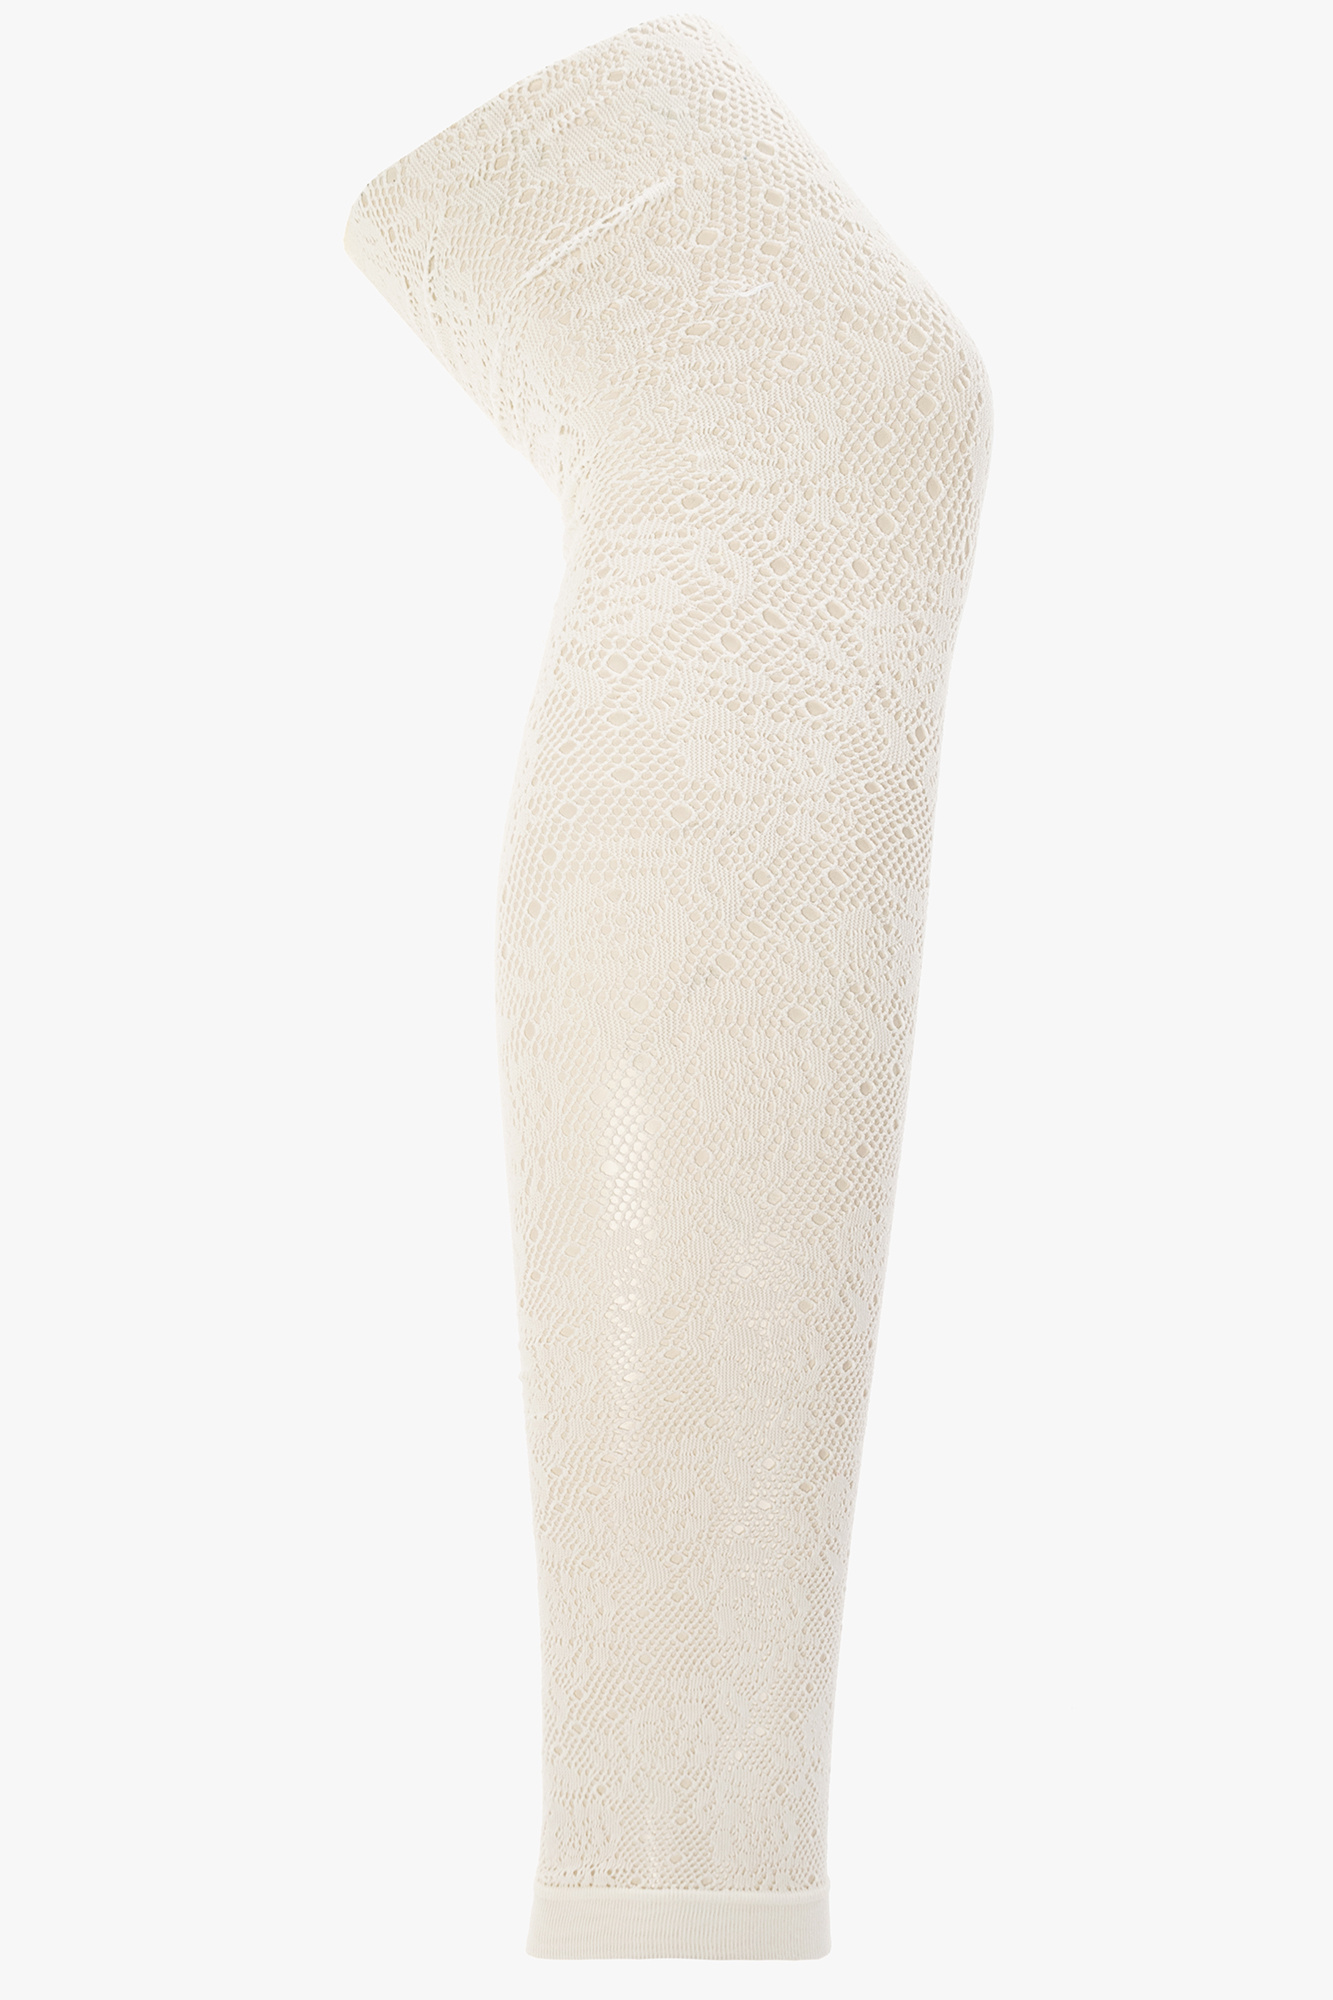 White Tights, Bride Cream Tights, Wedding Tights, Stockings, Lace